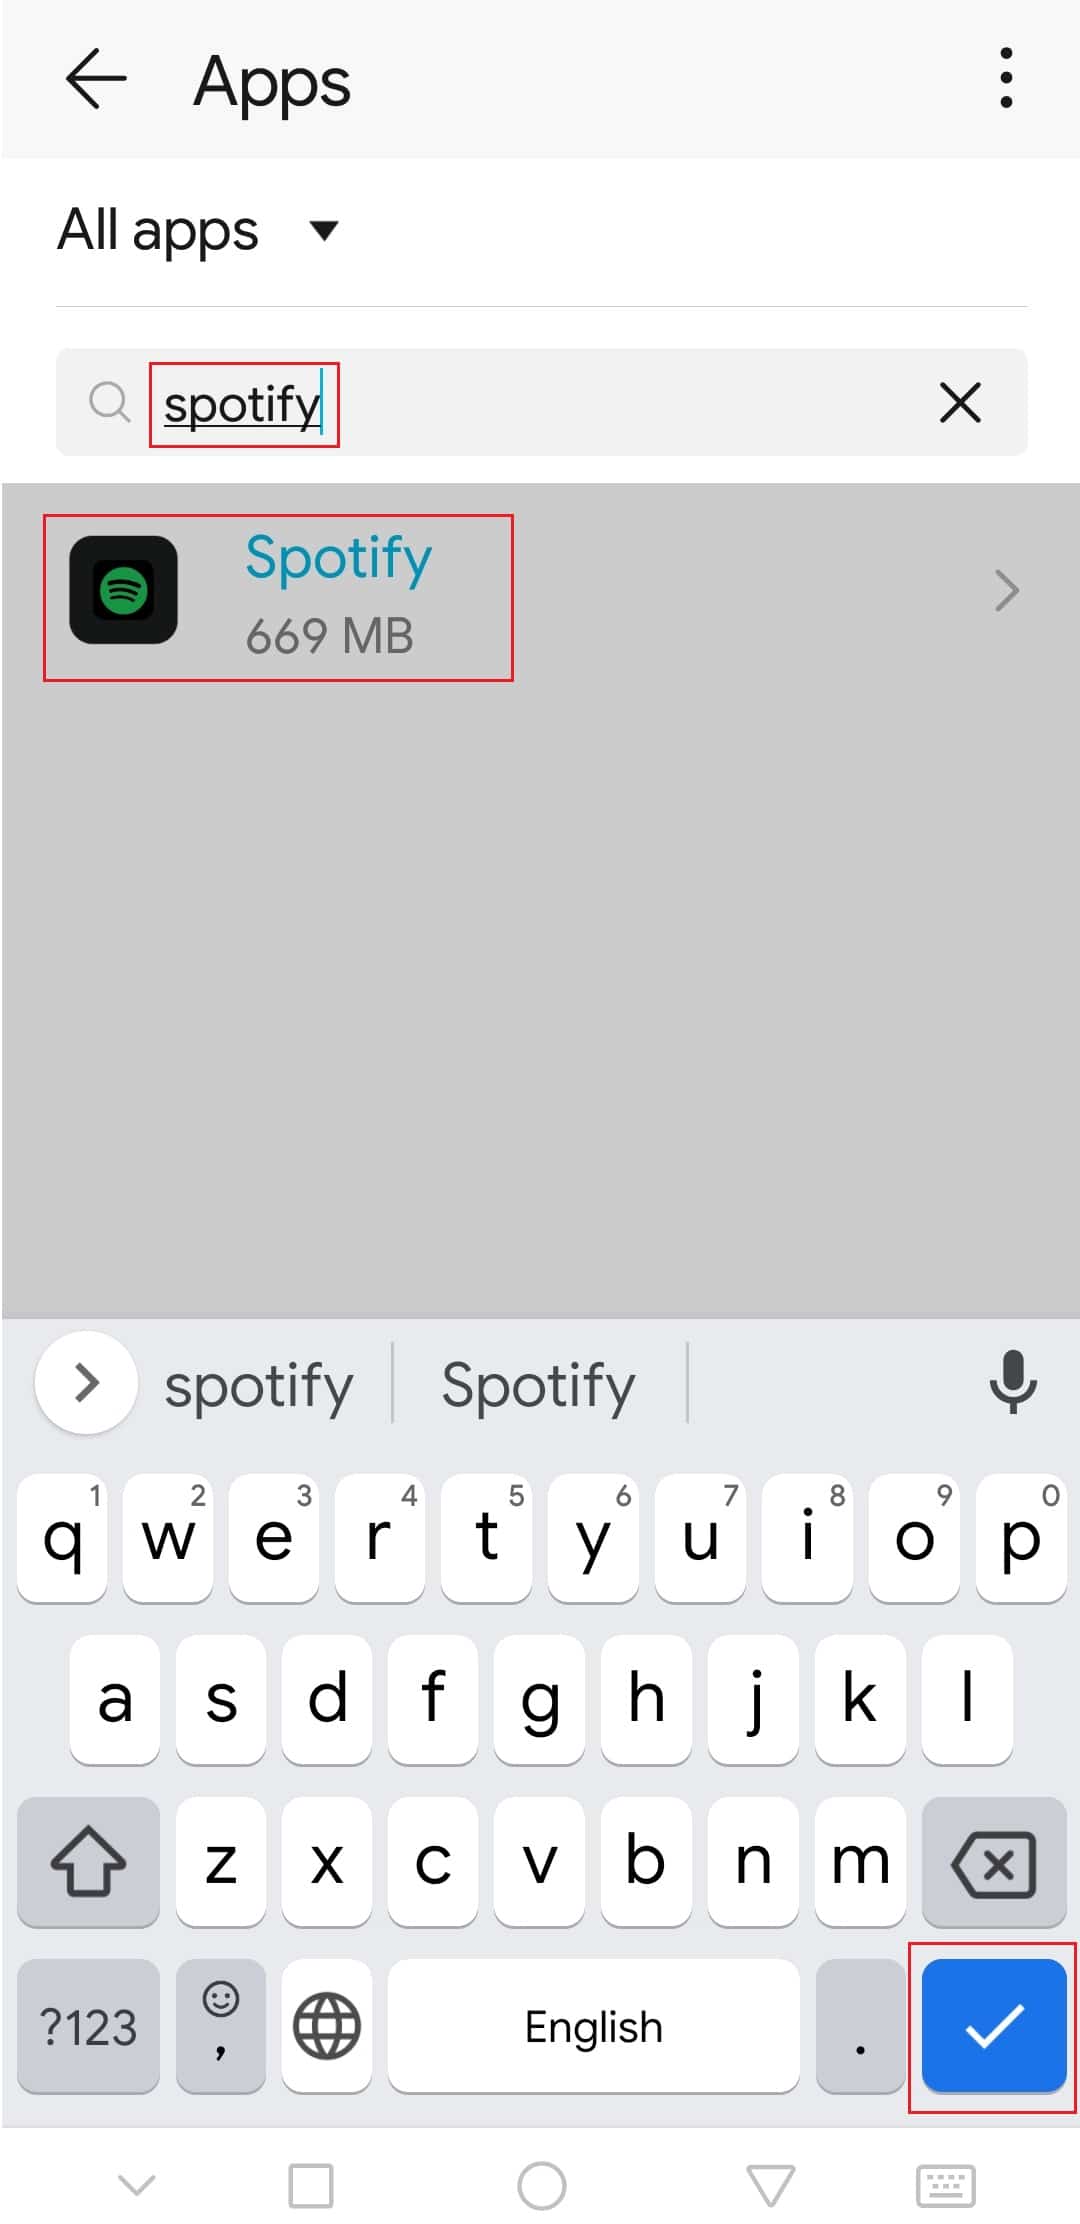 search for Spotify and tap on it to go to Spotify app settings on Android